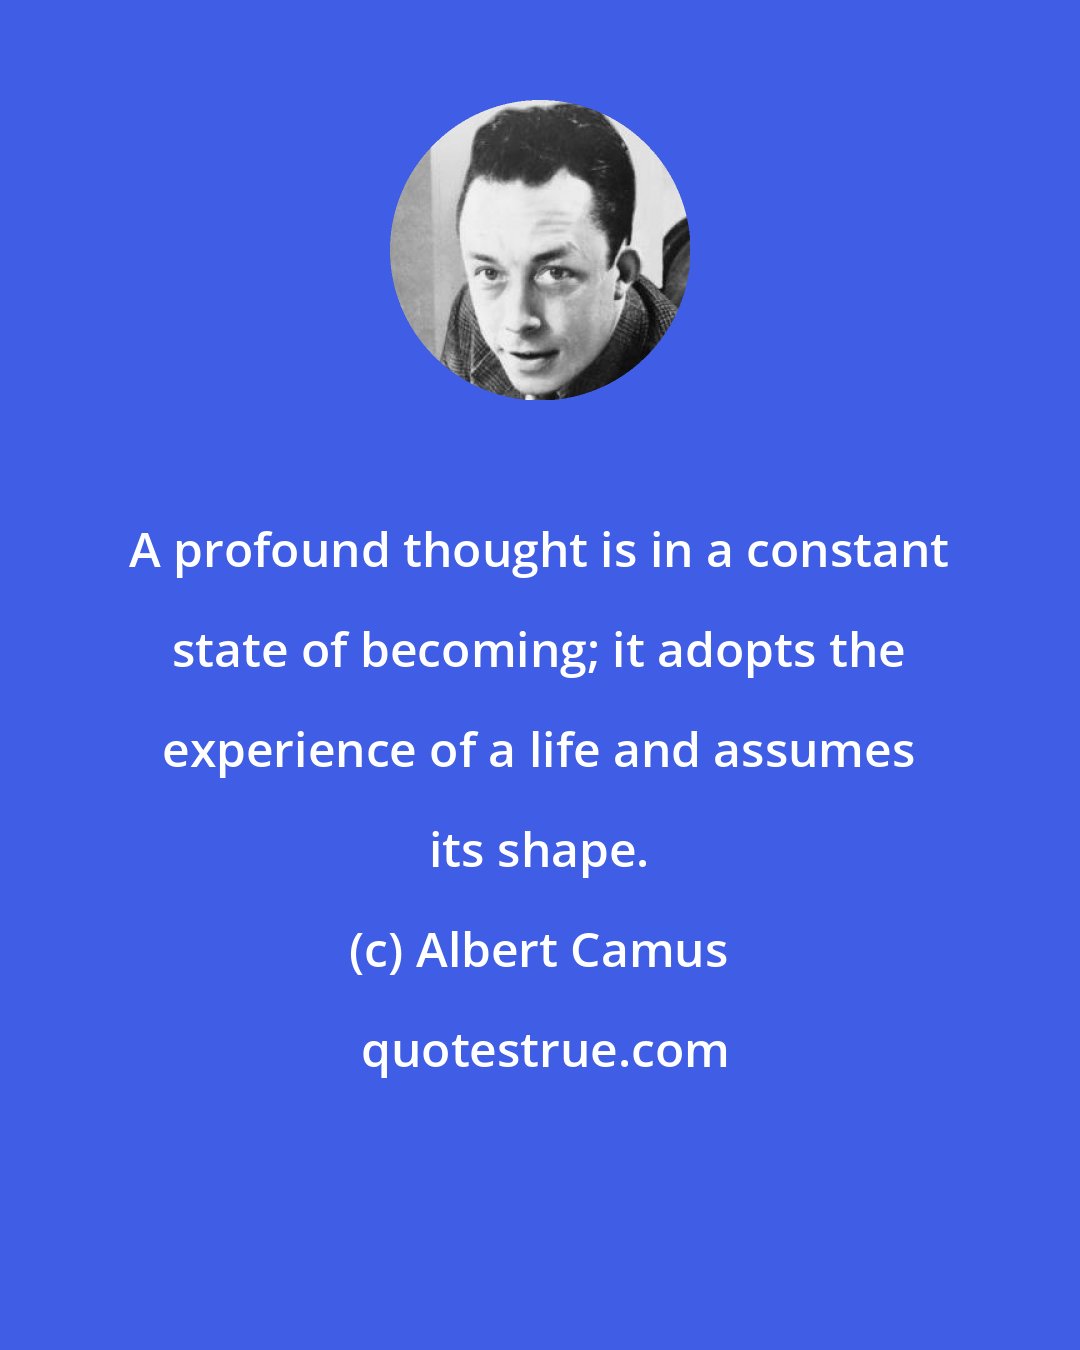 Albert Camus: A profound thought is in a constant state of becoming; it adopts the experience of a life and assumes its shape.